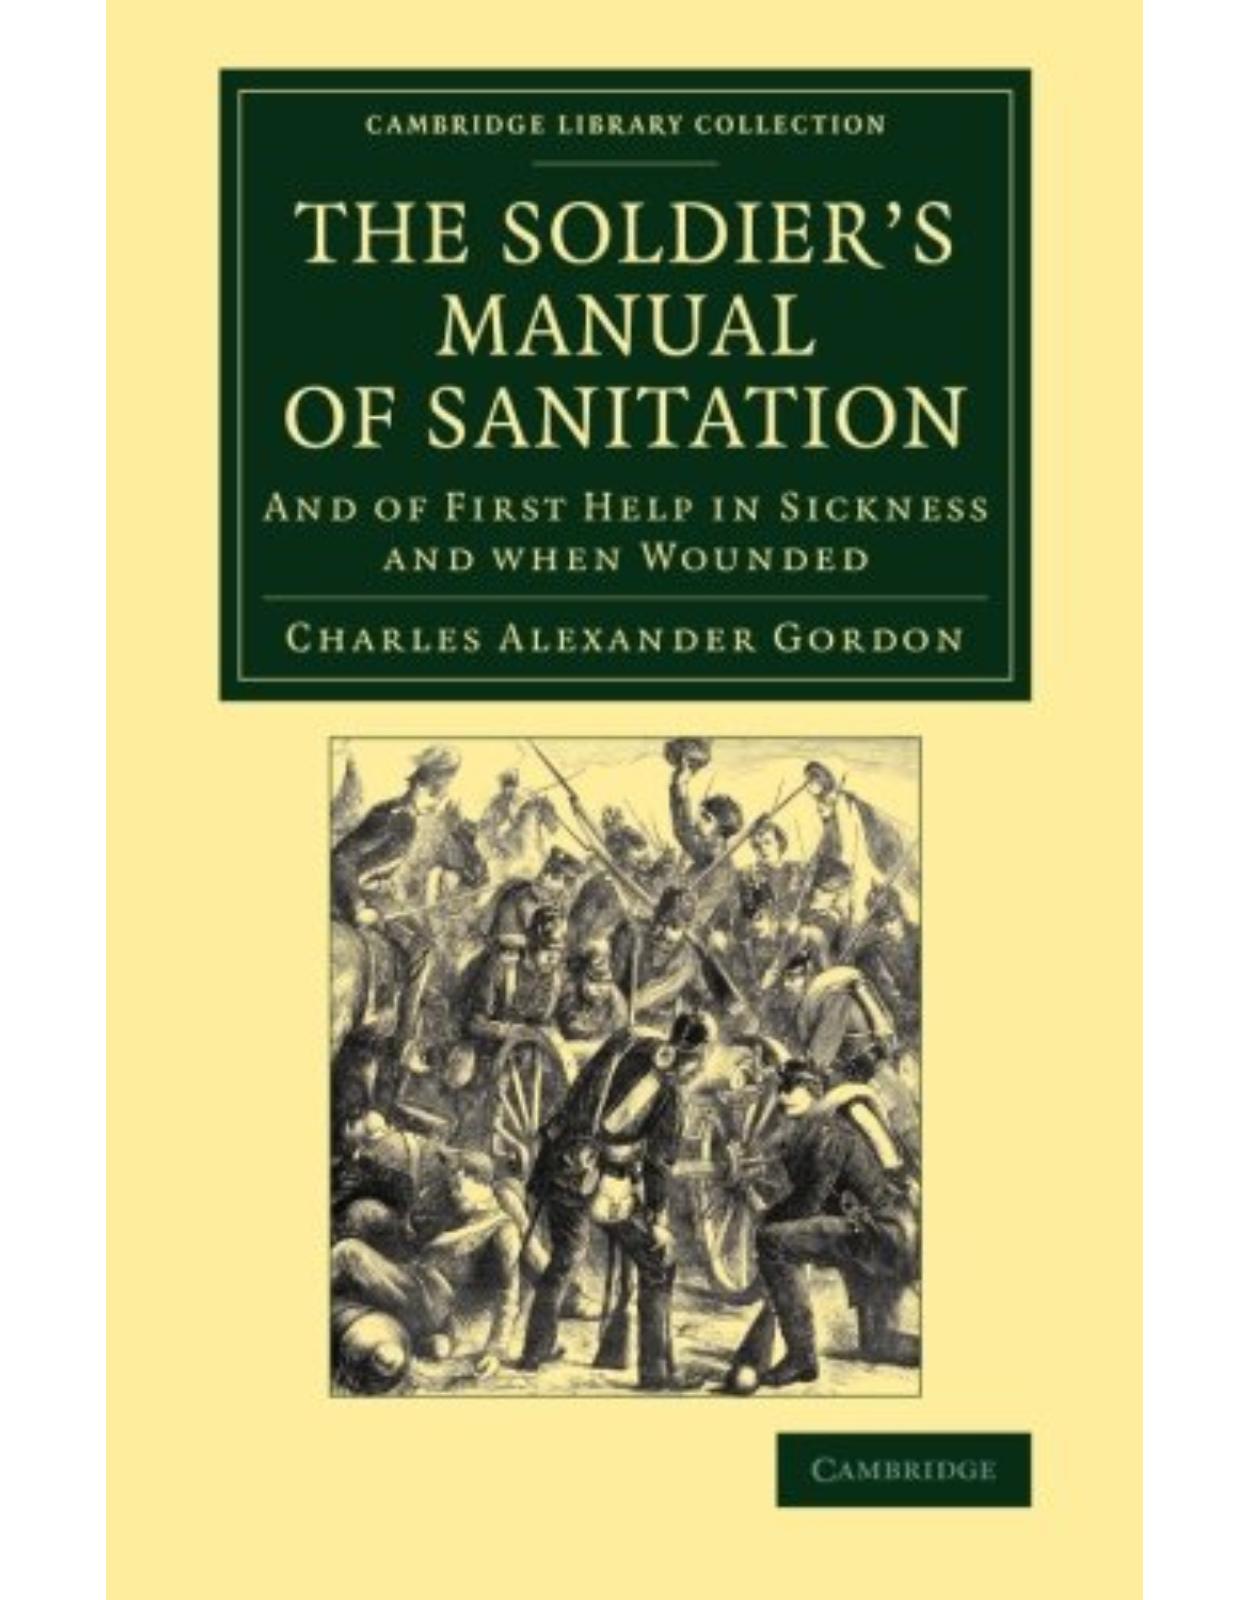 The Soldier's Manual of Sanitation: And of First Help in Sickness and When Wounded (Cambridge Library Collection - History of Medicine)